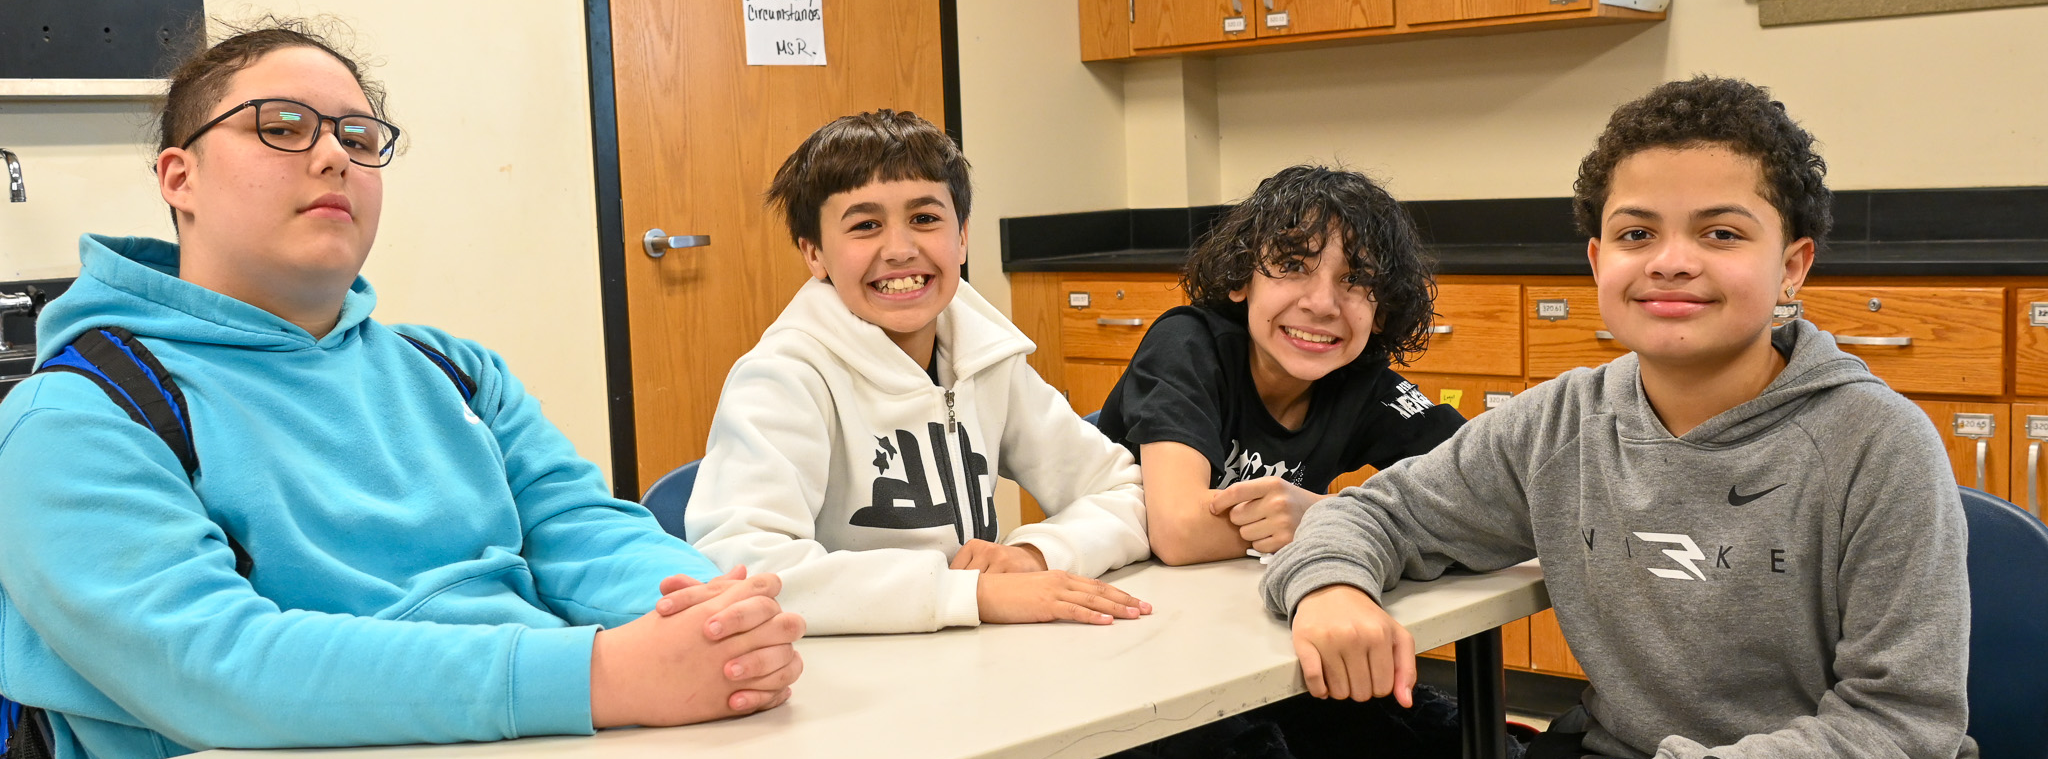 Four students smile at the camera in class